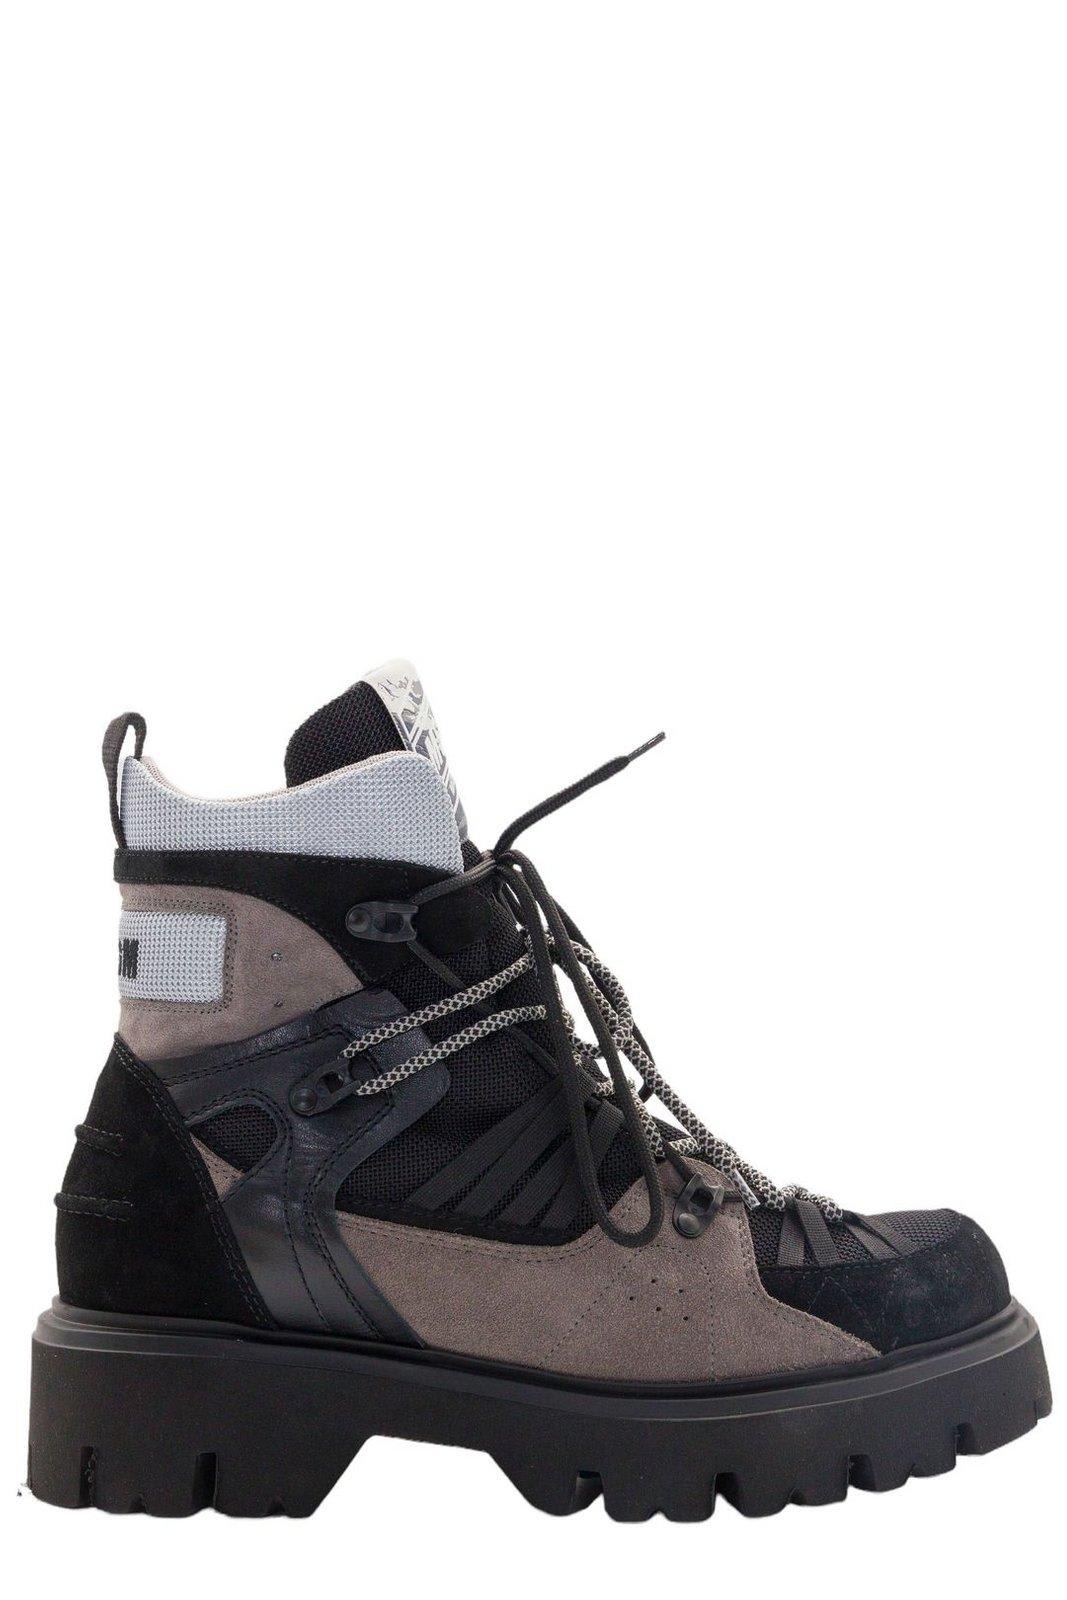 MSGM Panelled Lace-up Boots